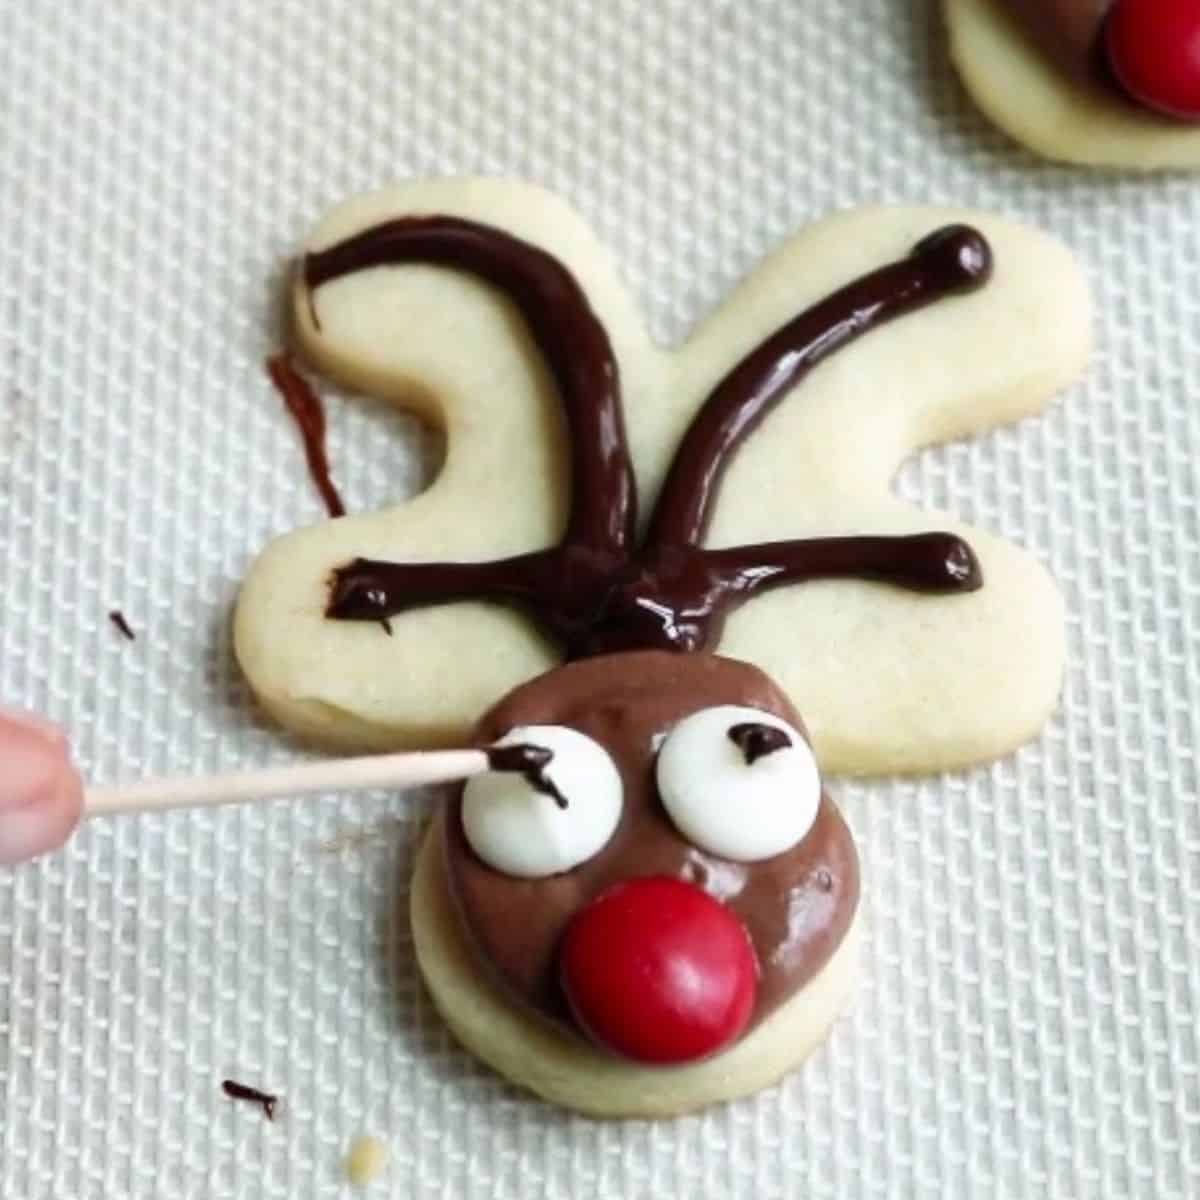 Using melted chocolate to make eyes on reindeer cookie